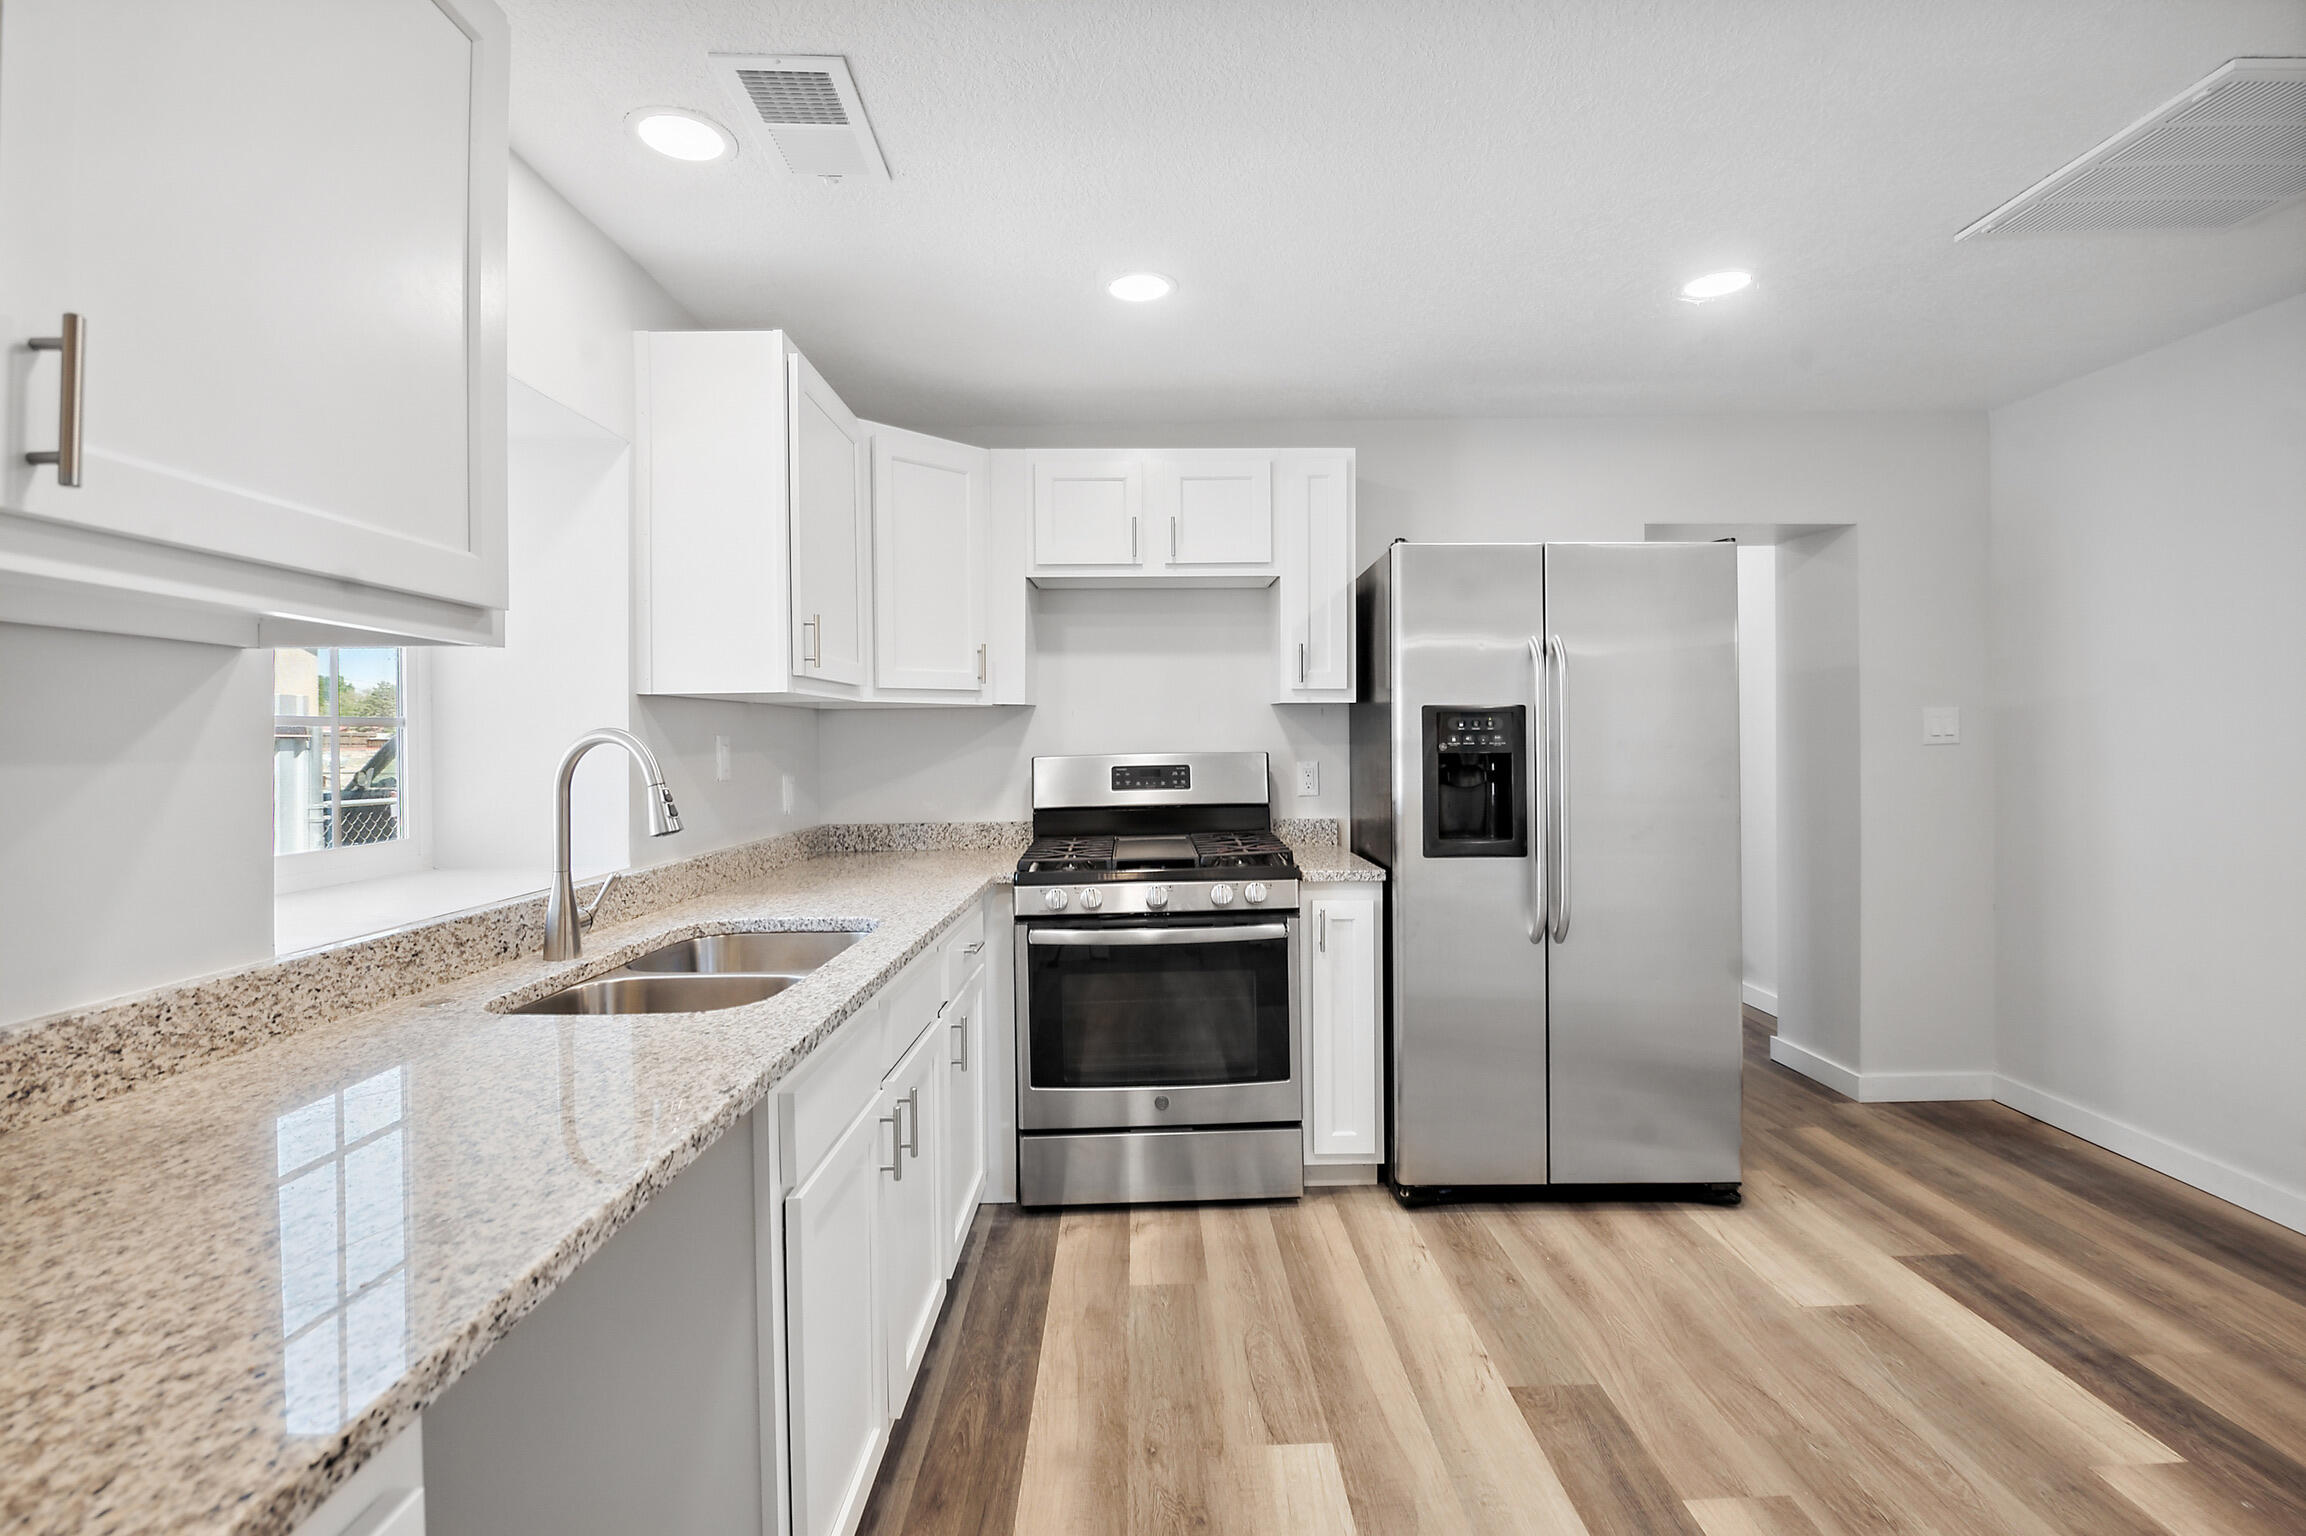 Checkout this beautifully remodeled home.NEW refrigerated air unit, paint, toilets, lighting, windows, cabinets, granite countertops,Luxury Vinyl plank floorings. Come see for yourself.